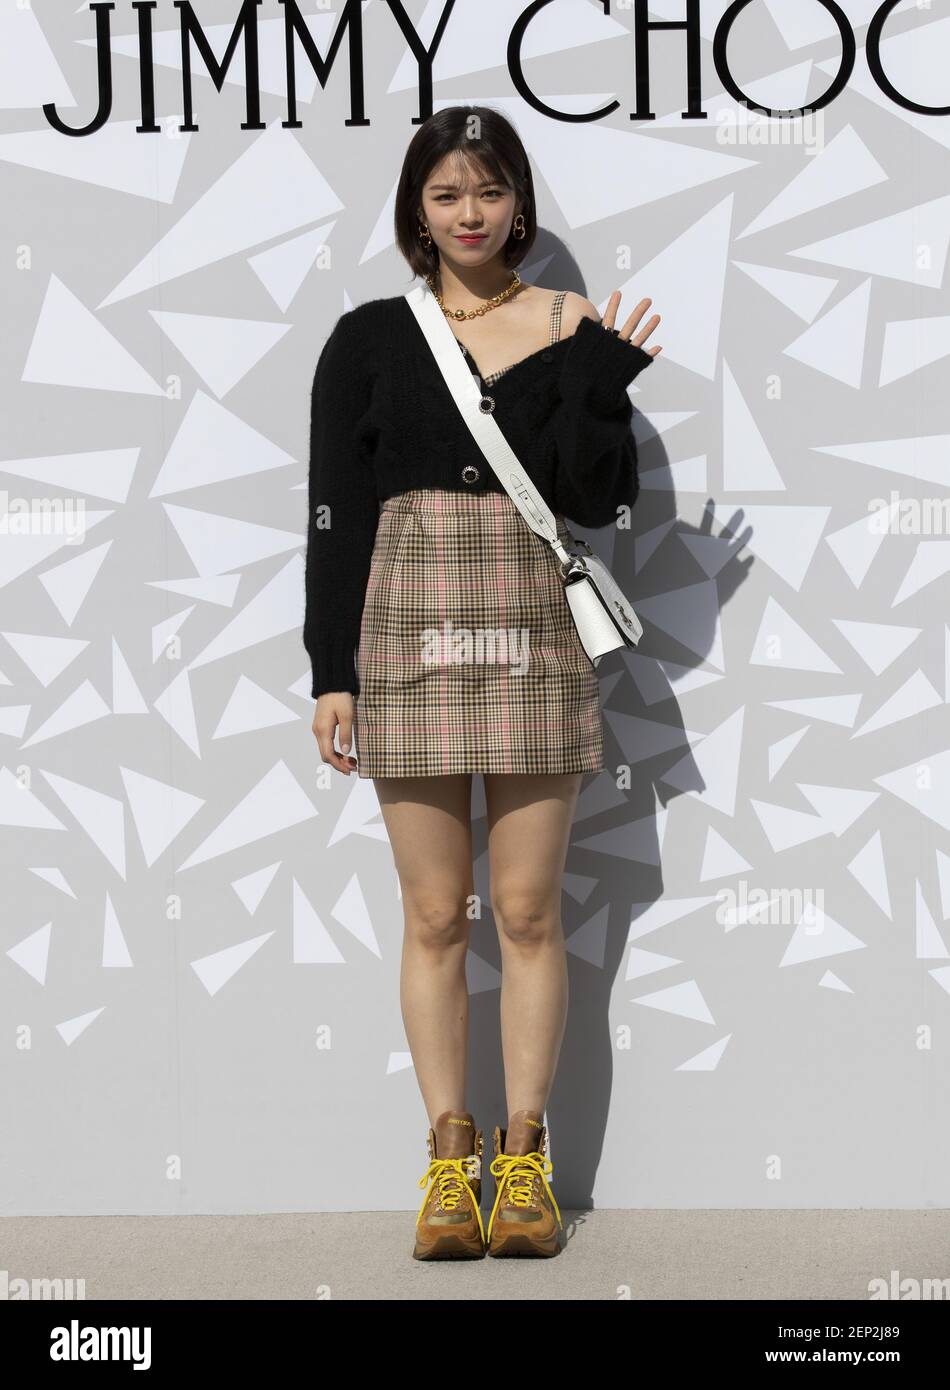 31 October 2019 - Incheon, South Korea : South Korean singer Jeongyeon,  member of South Korean girl group Twice, attends a photo call for the Louis  Vuitton launching at Incheon International Airport